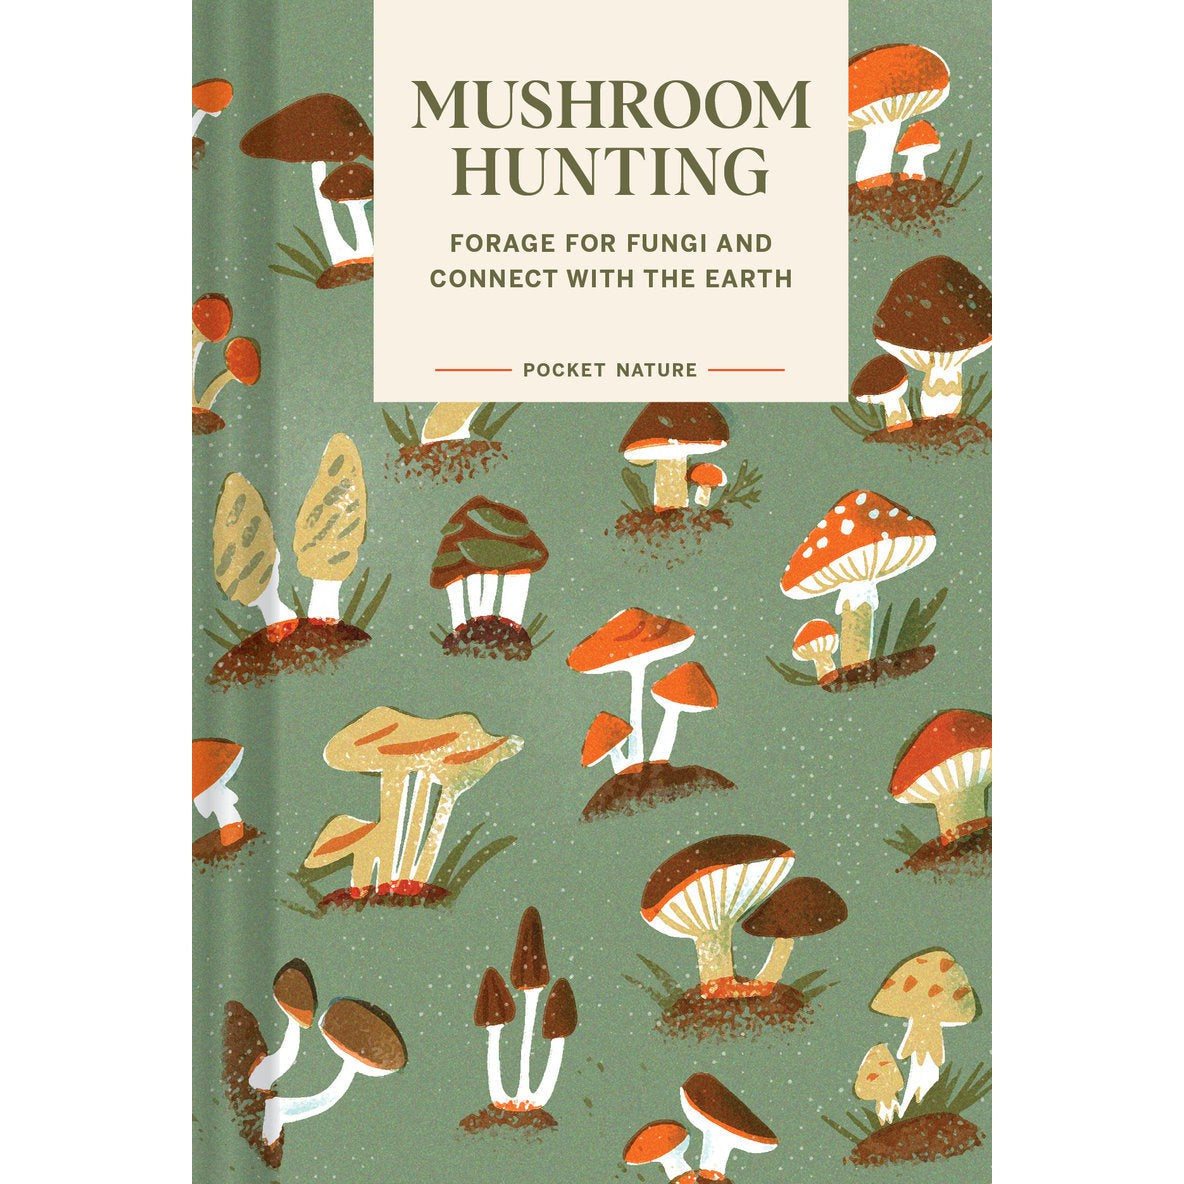 Pocket Nature: Mushroom Hunting Forage for Fungi and Connect with the Earth-Raincoast Books-Modern Rascals